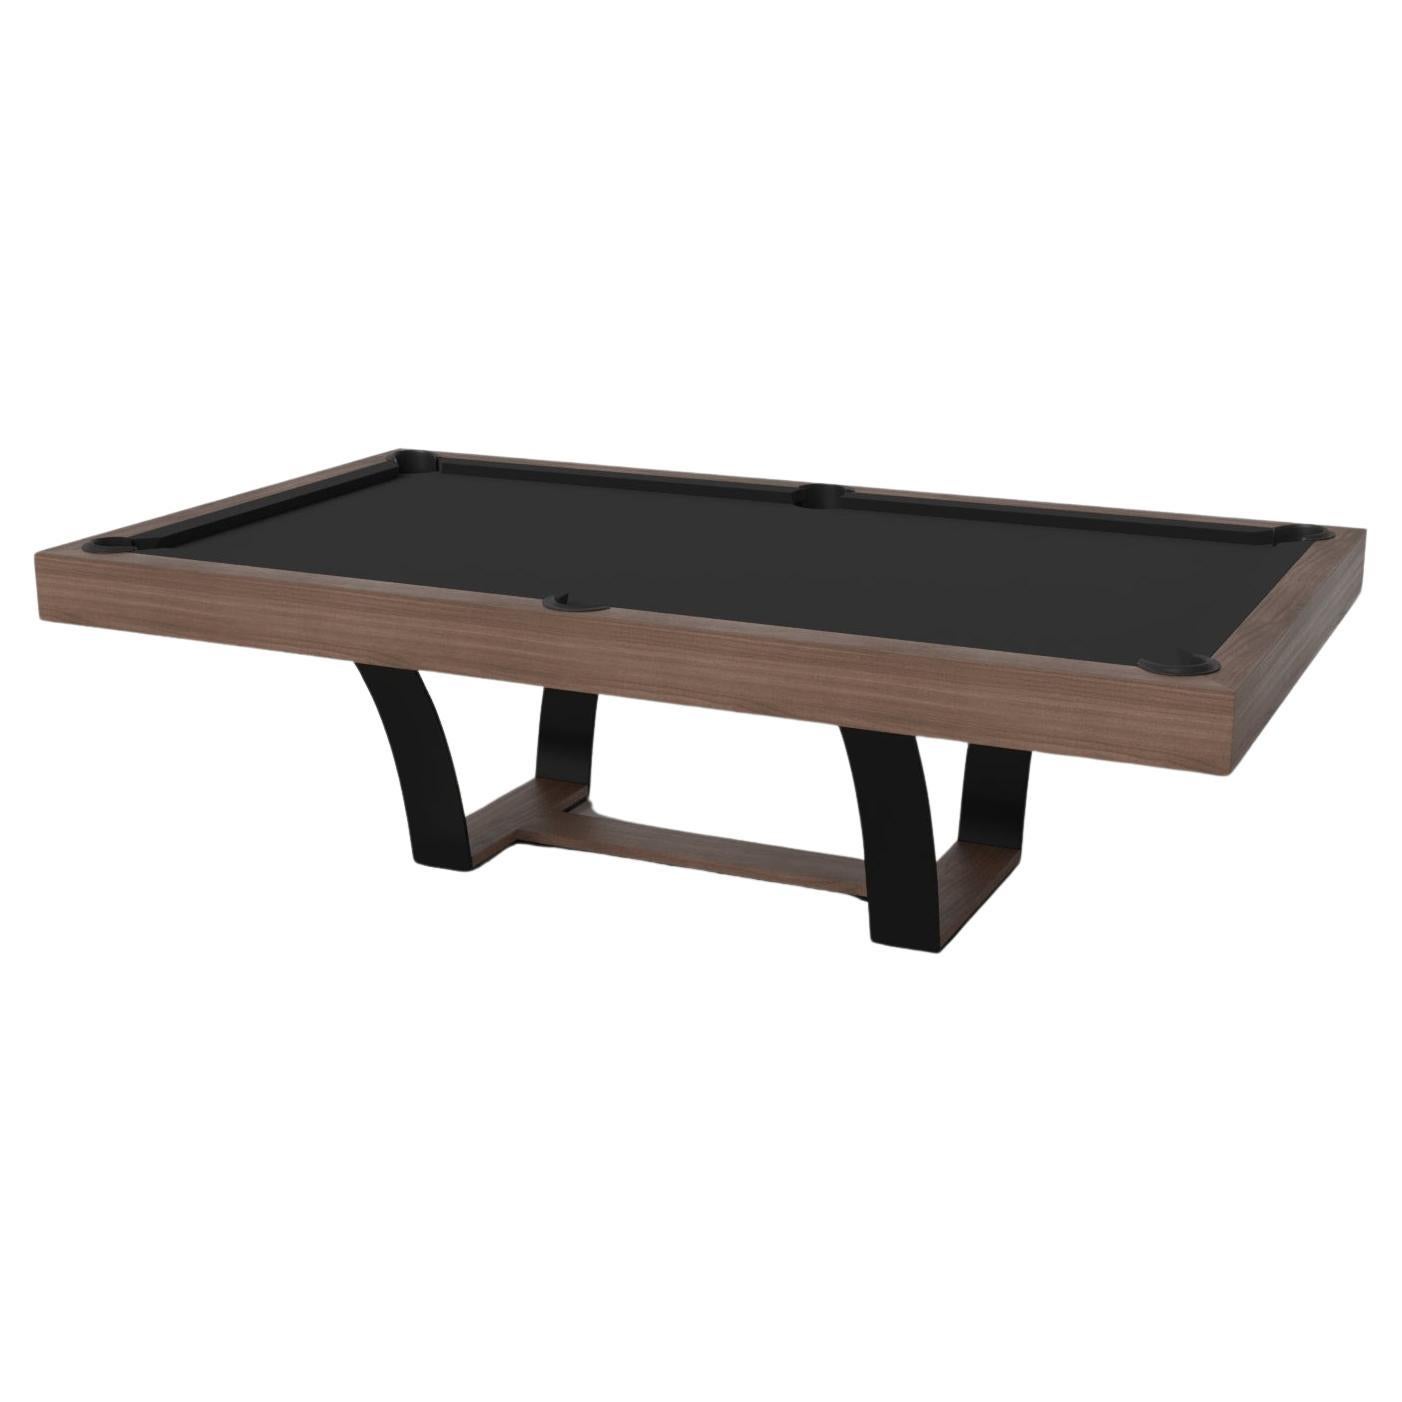 Elevate Customs Elite Pool Table / Solid Walnut Wood in 9' - Made in USA For Sale